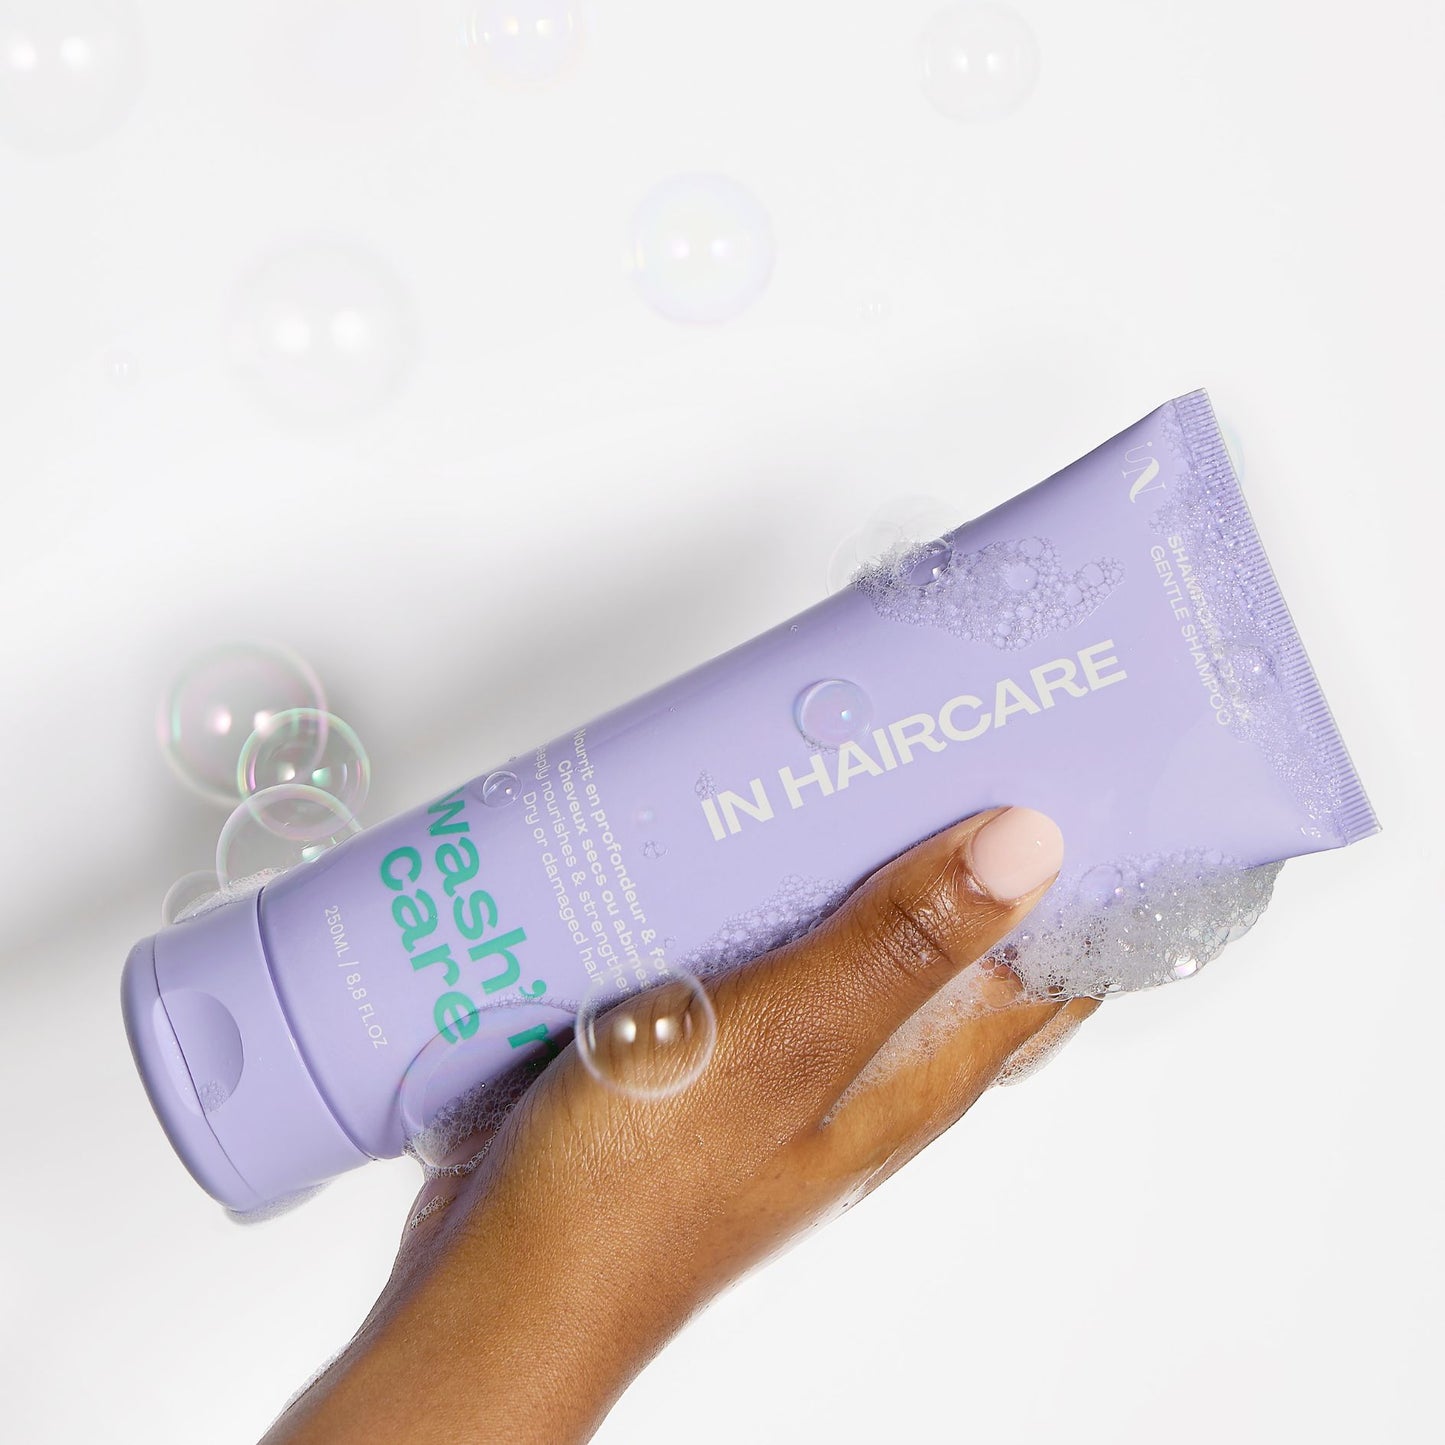 shampooing wah n care in haircare mousse et main